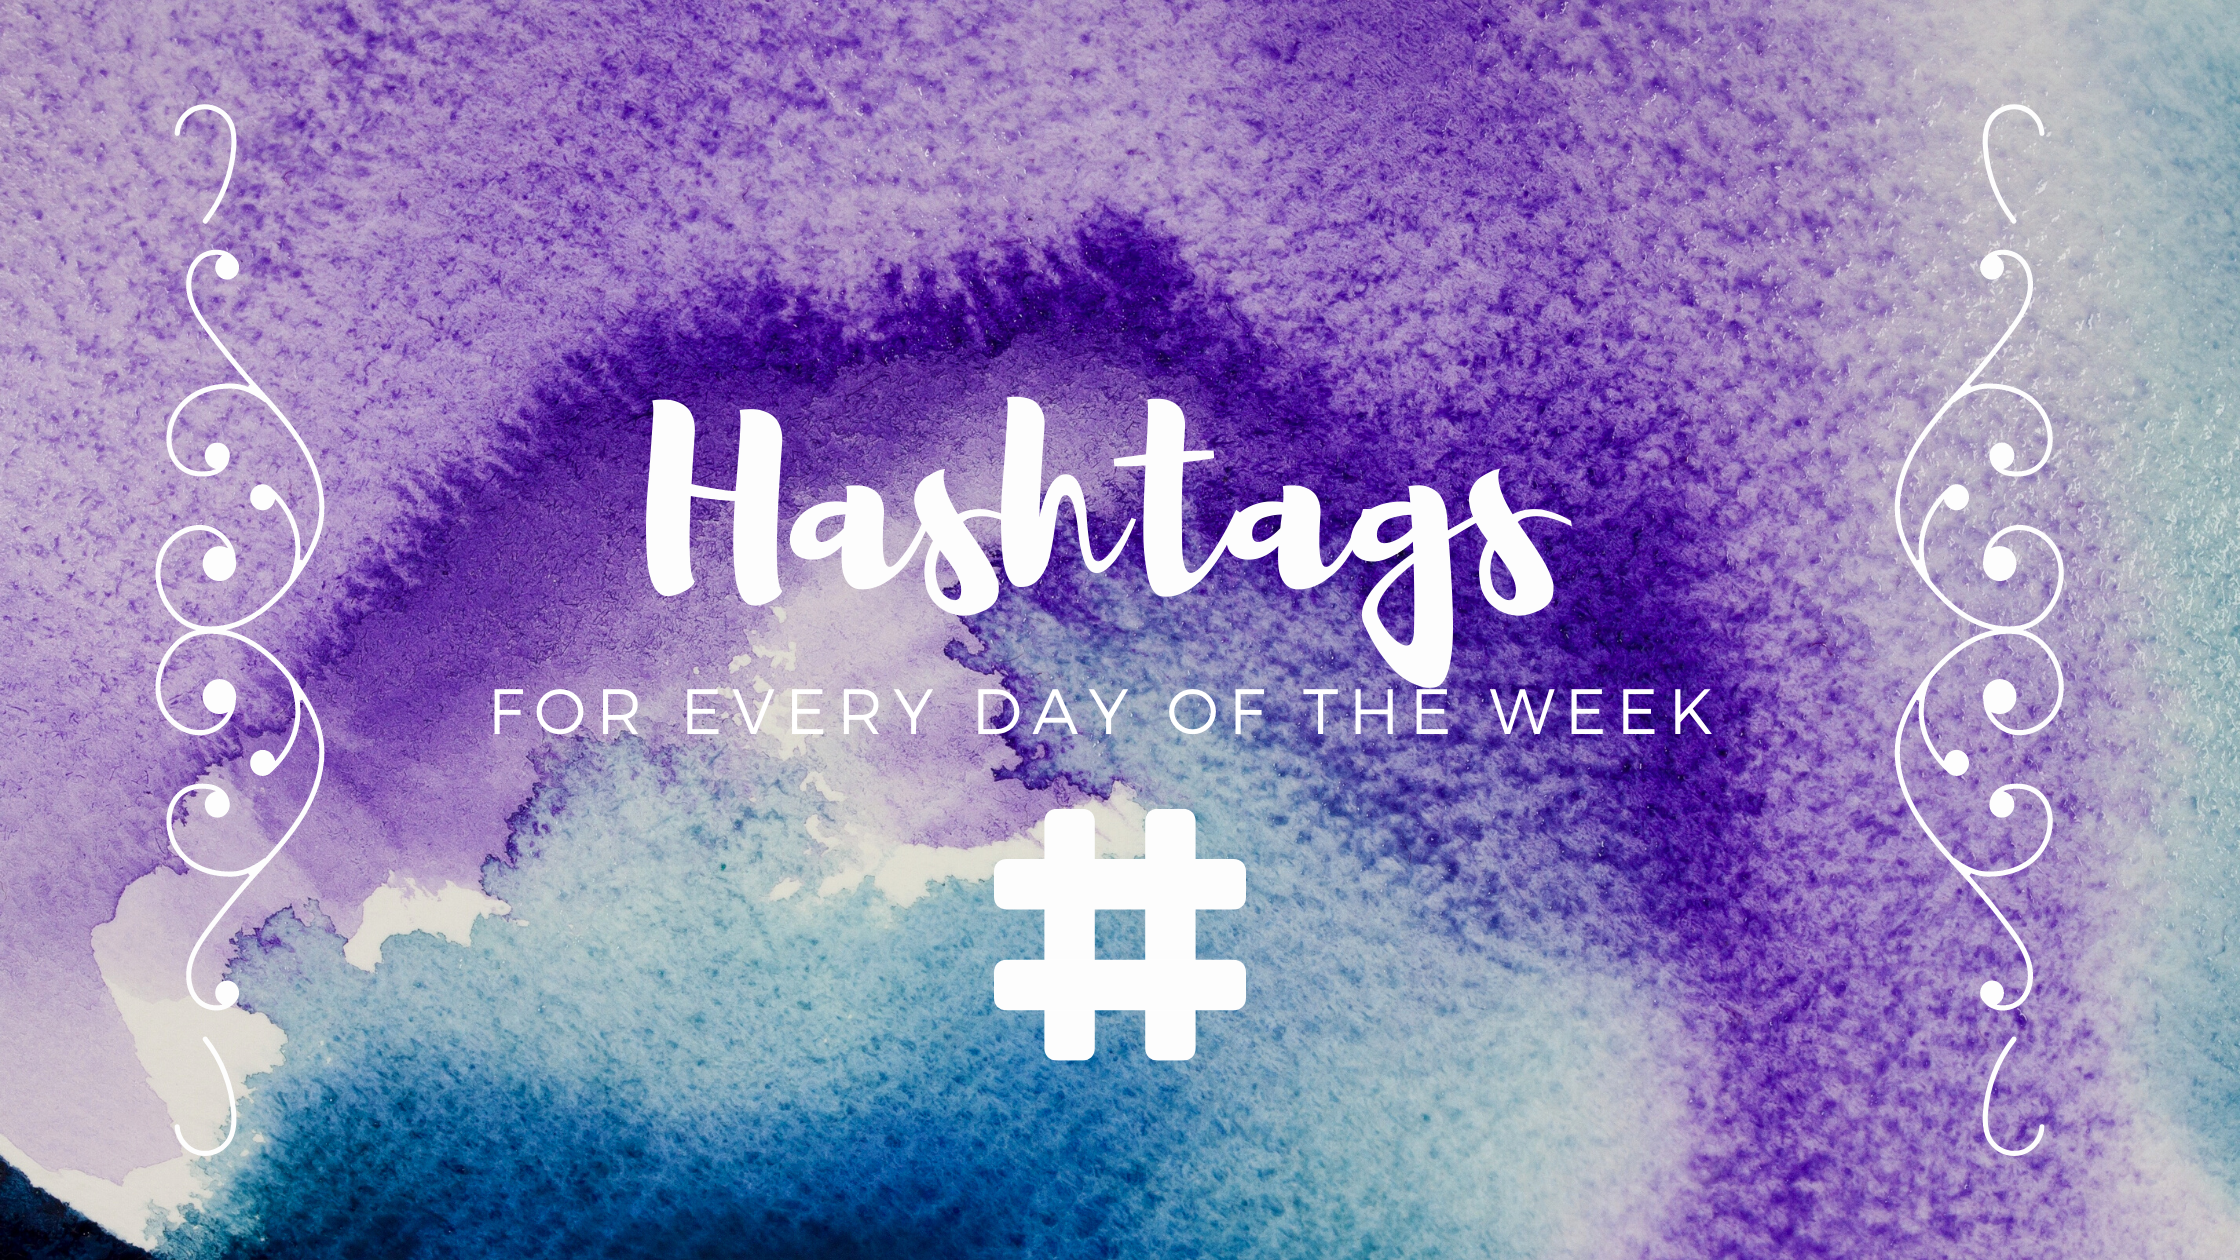 Hashtags For Every Day of the Week